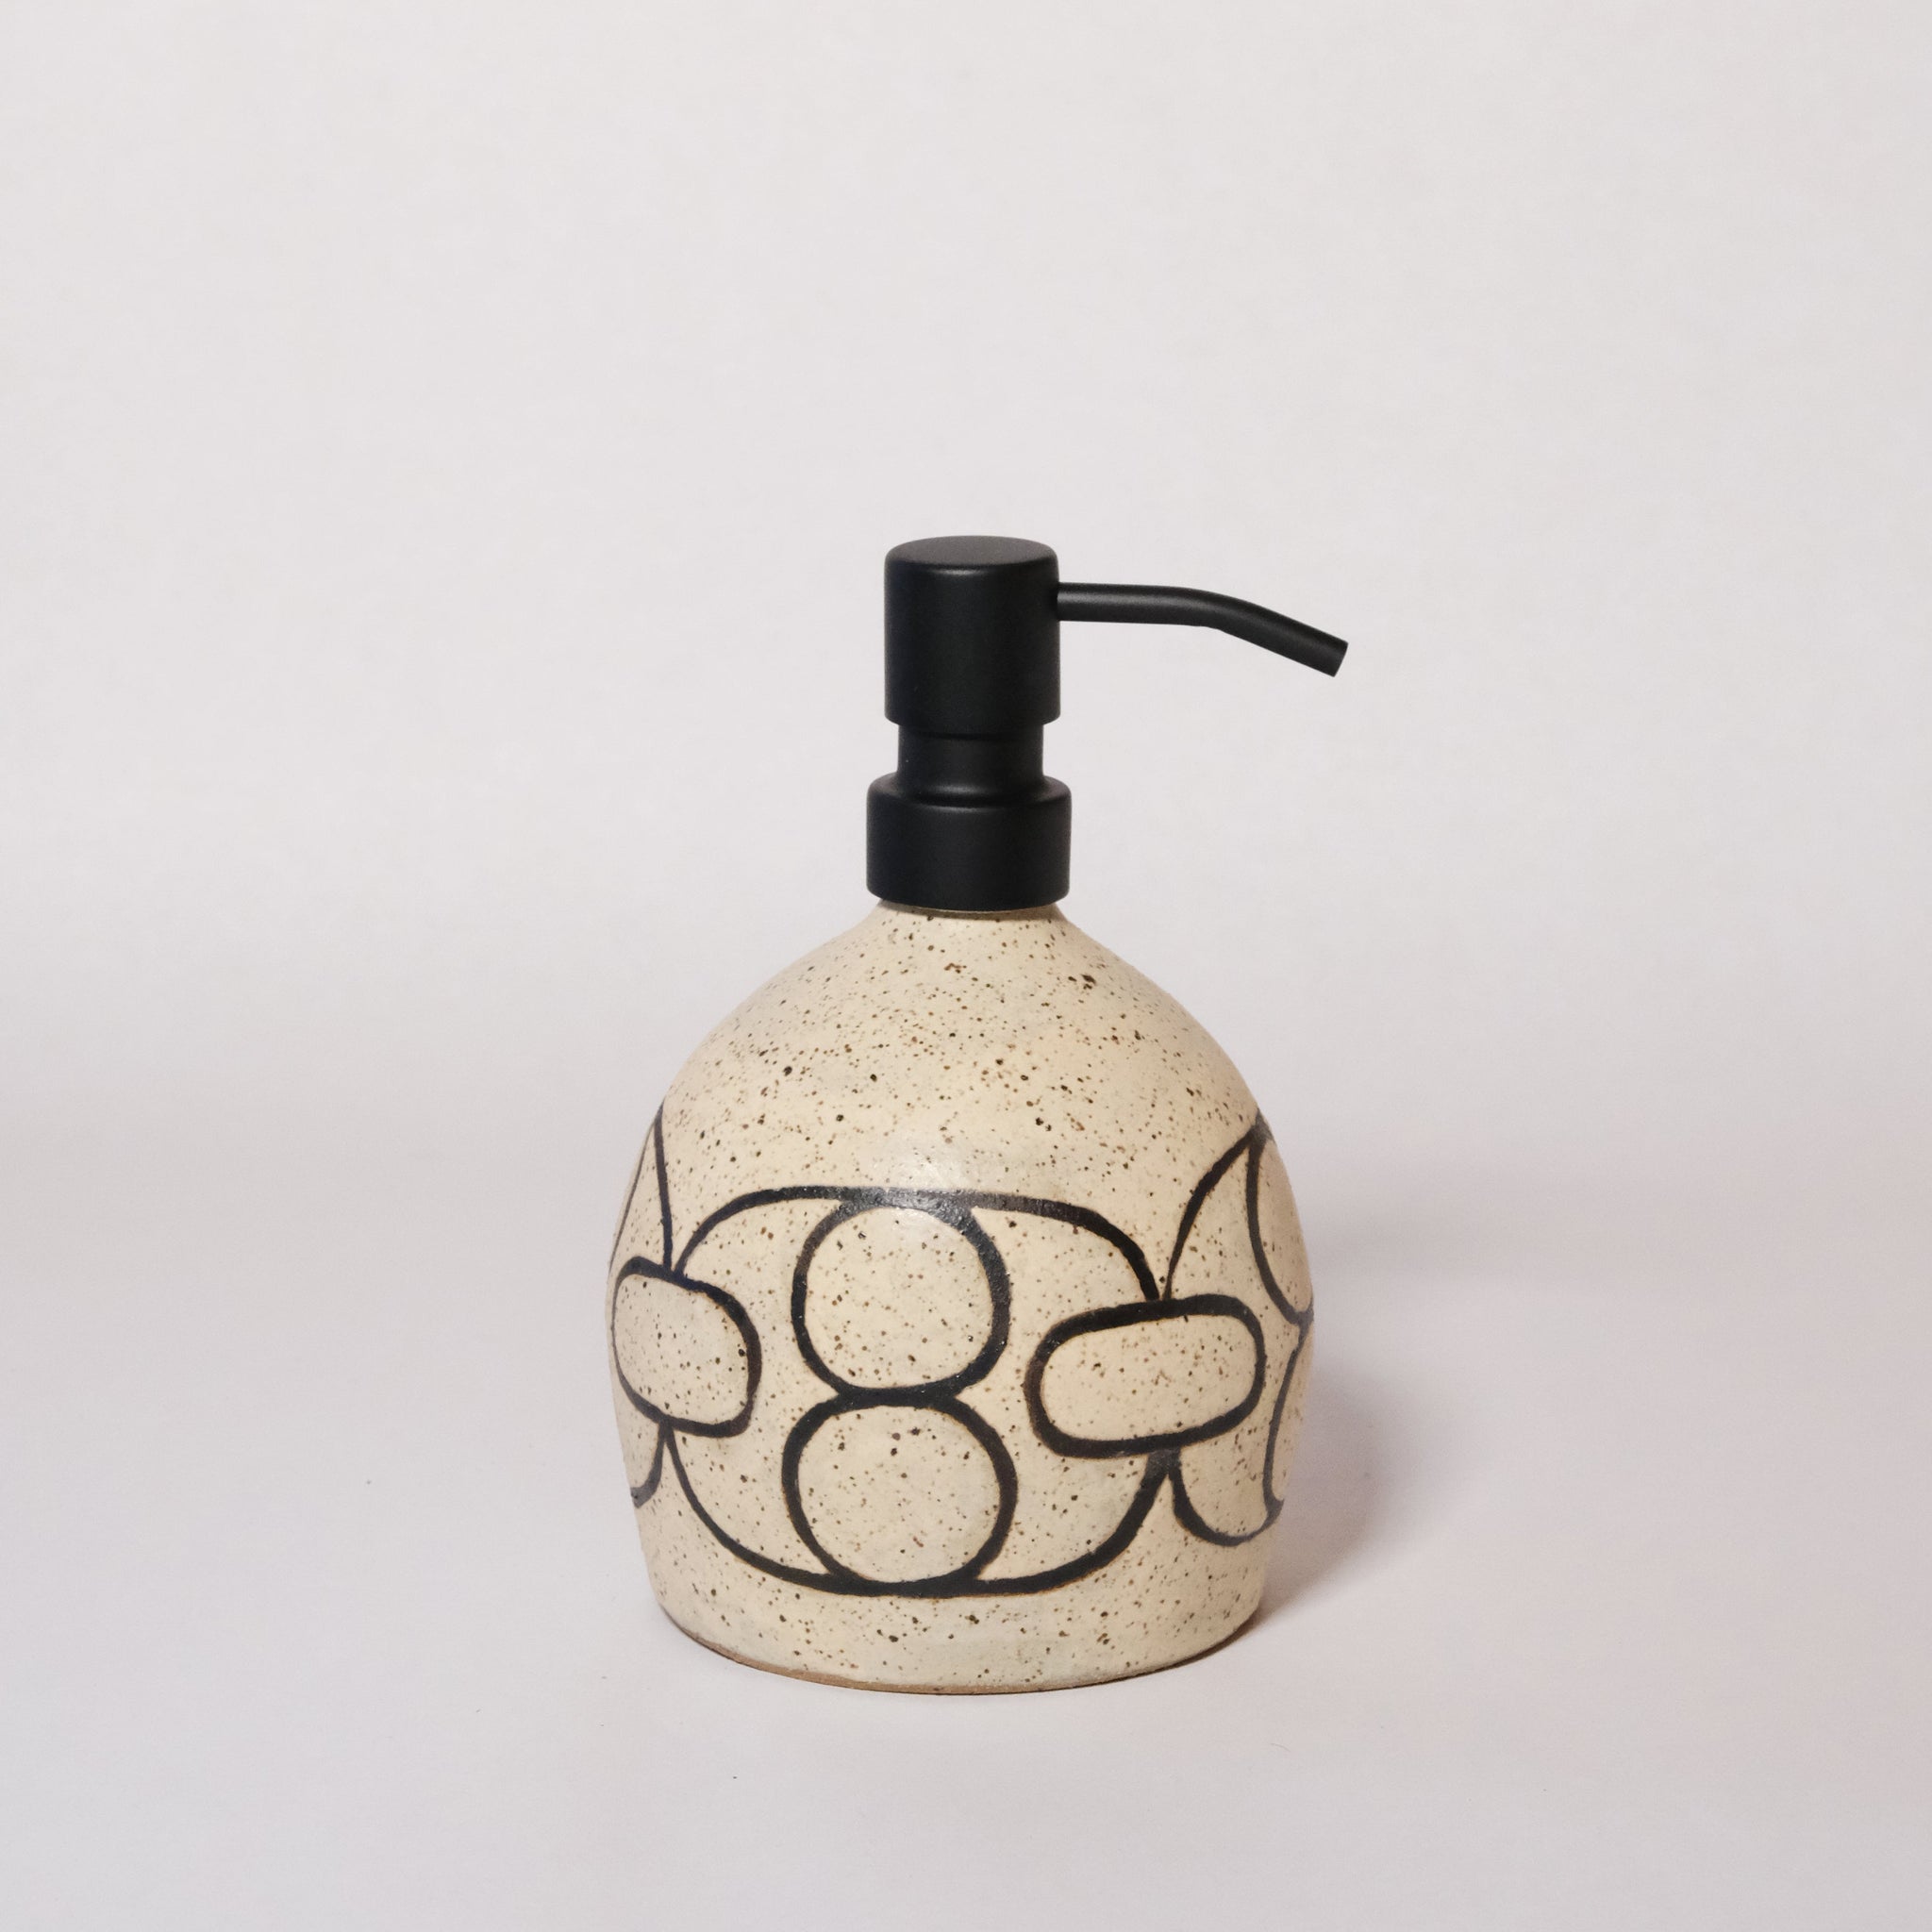 Made-to-Order Glazed Stoneware Soap Dispenser with Circle Pattern